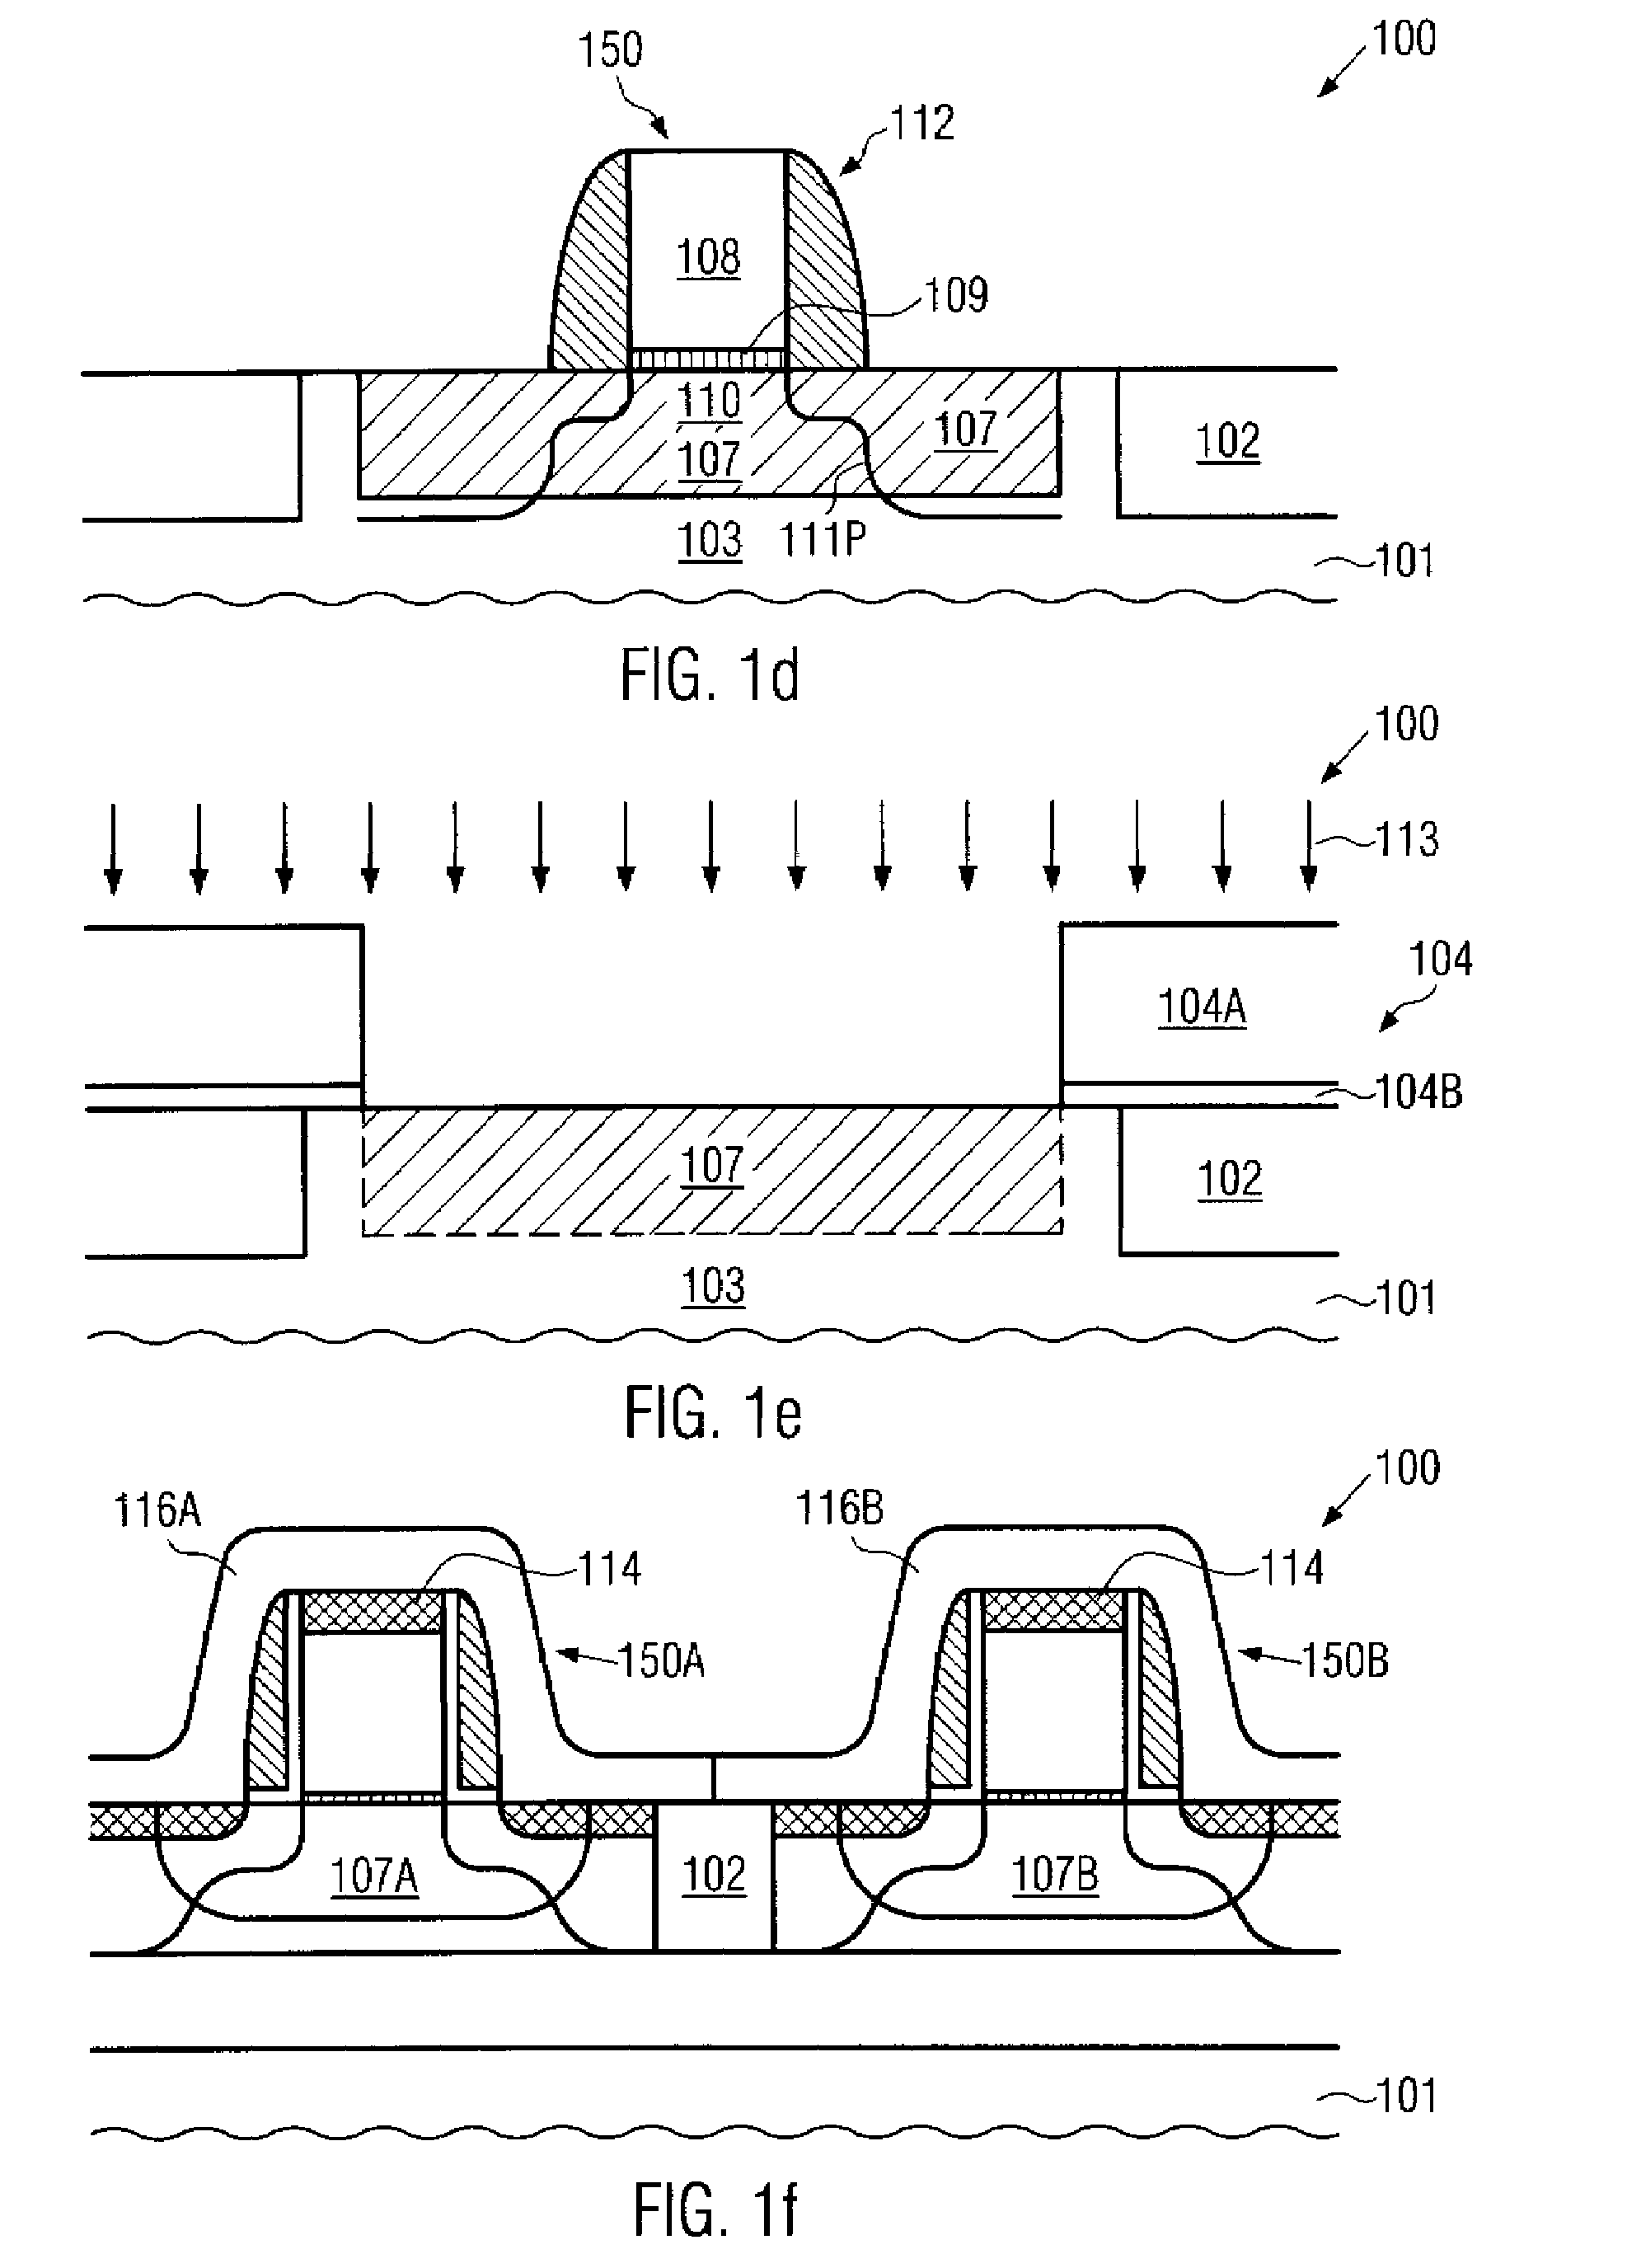 Formation of transistor having a strained channel region including a performance enhancing material composition utilizing a mask pattern